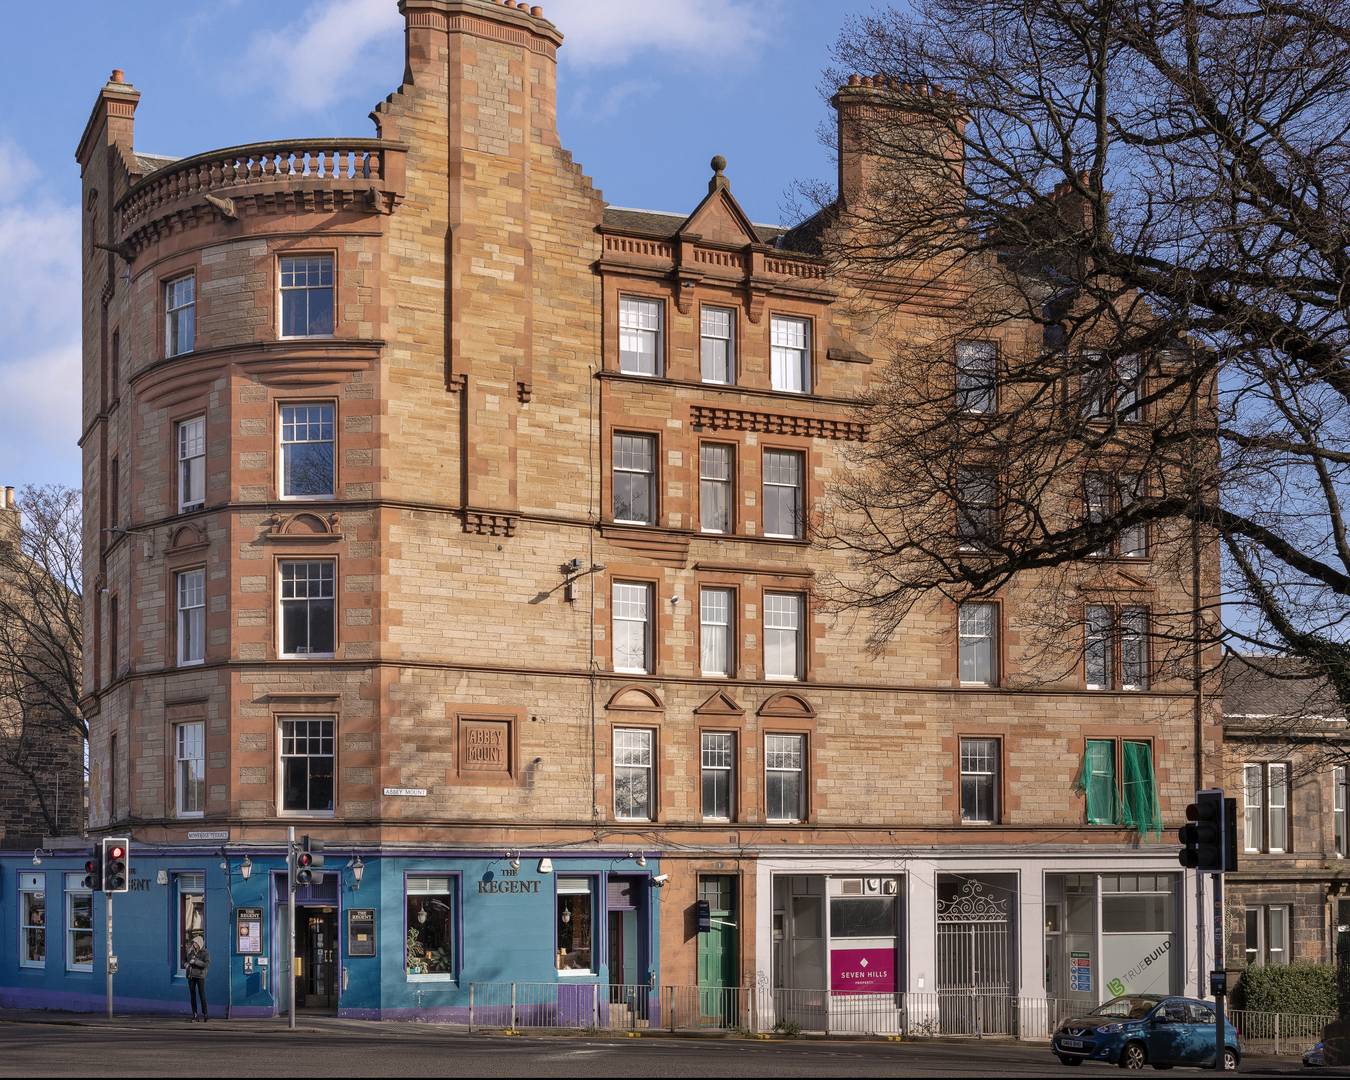 The Regent is situated on the ground floor of an impressive tenement building.